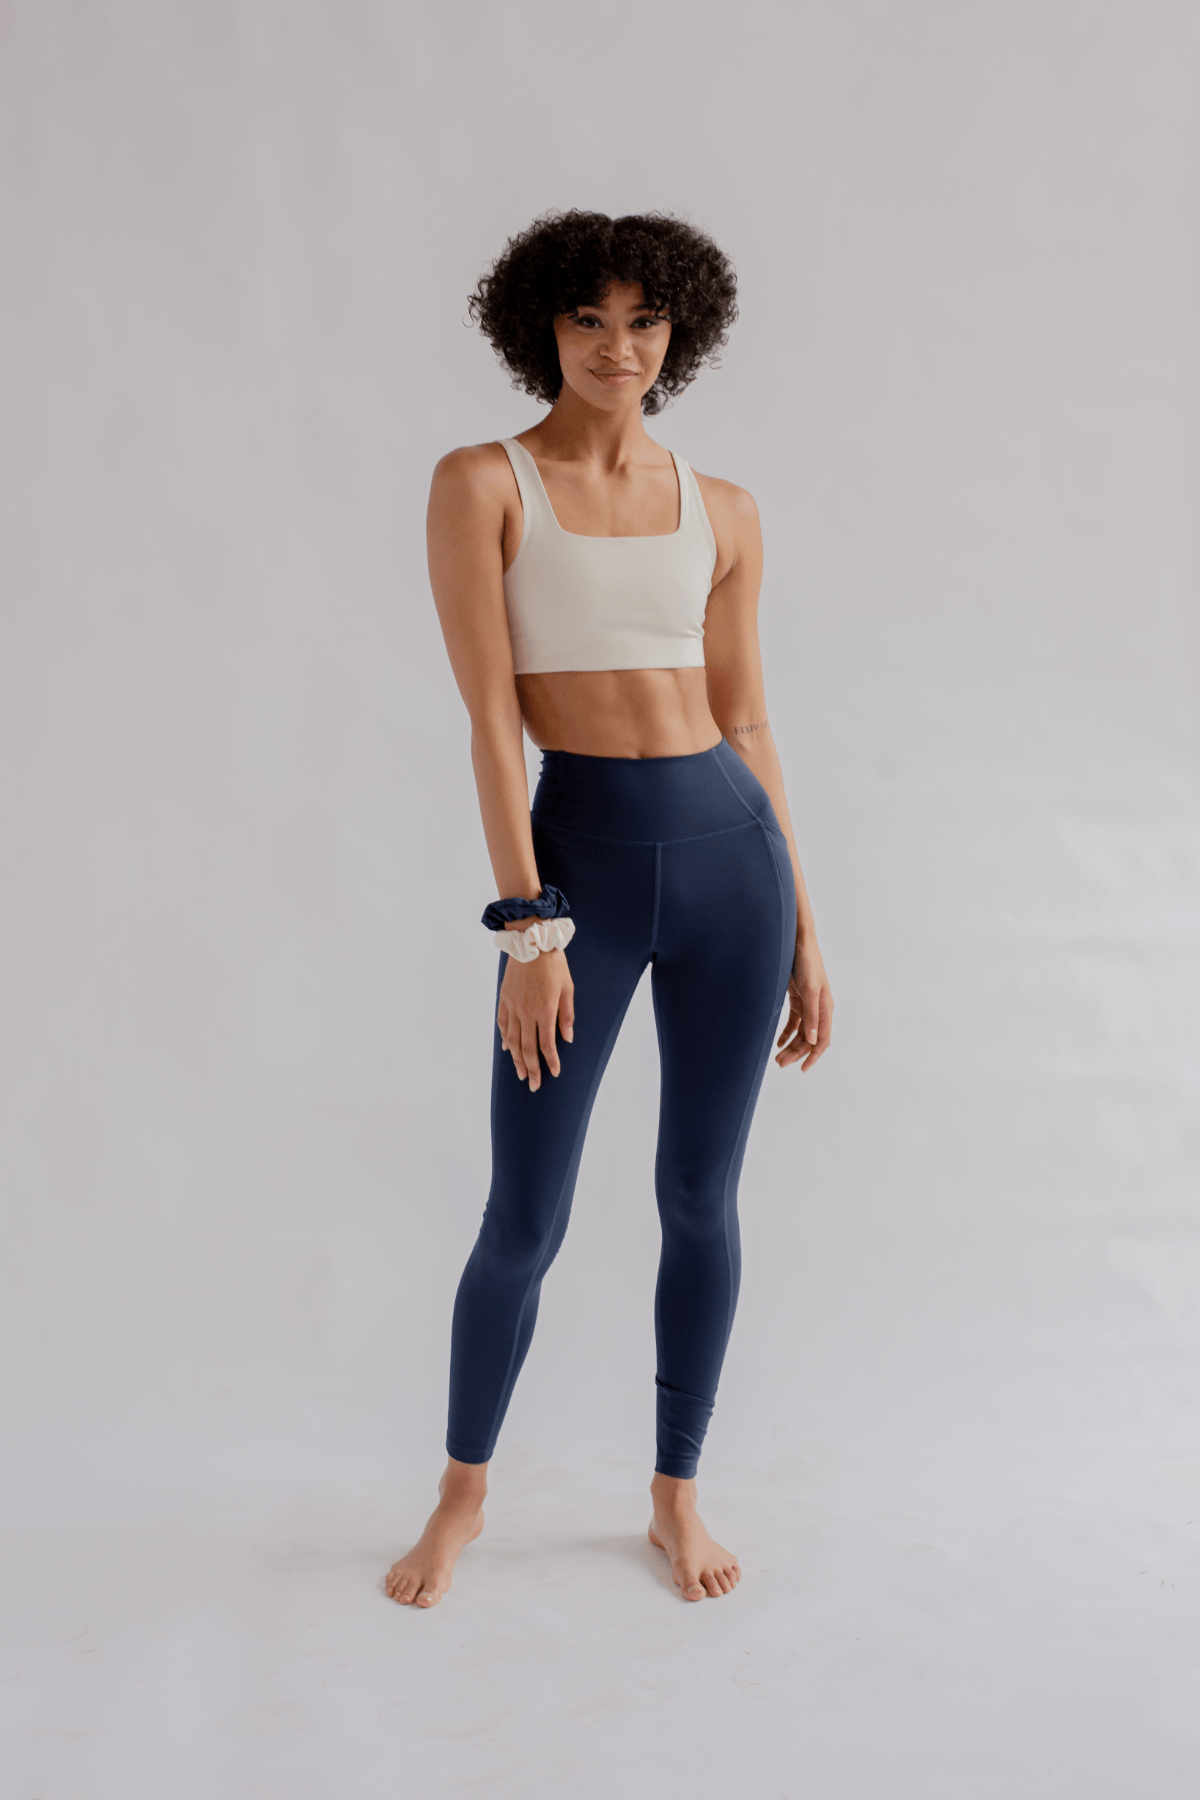 Knix HiTouch High Rise Legging in Circuit Blue Size M - $41 (48% Off  Retail) - From Sydney